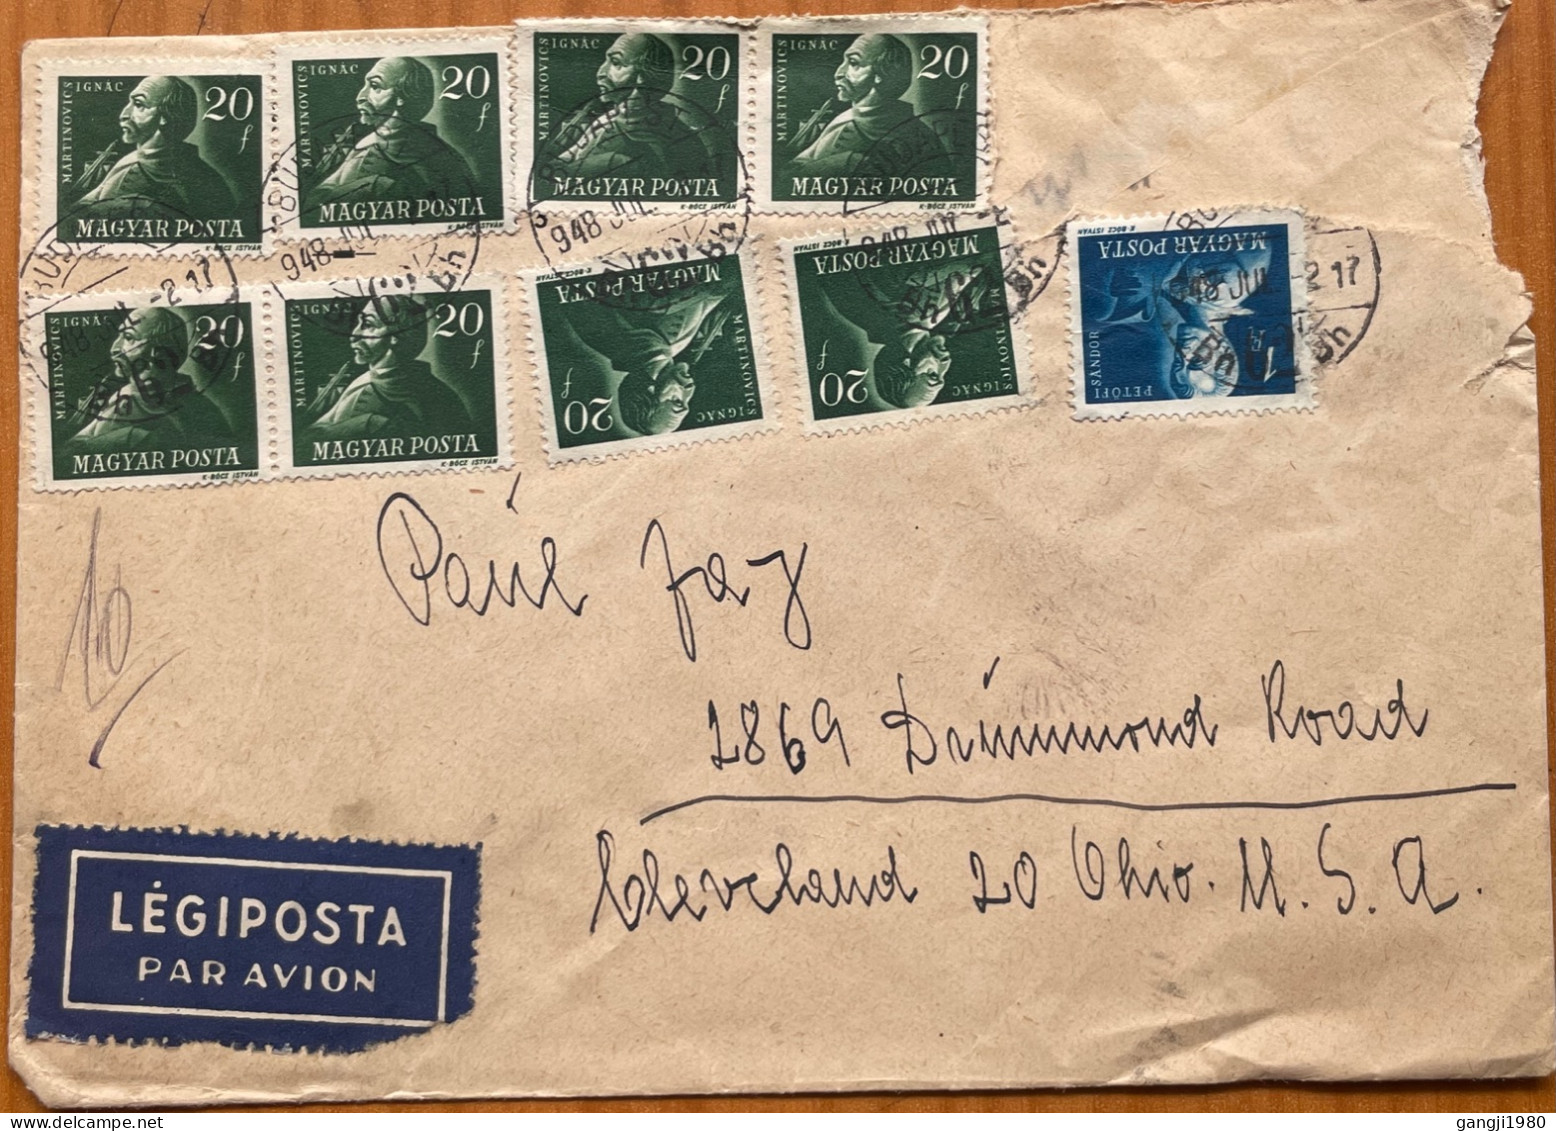 HUNGARY 1948,  TORNED COVER, USED TO USA, 9 MULTI STAMP, WRITER MARTINOVICS. S. PETOFI PORTRAIT, POET, BUDAPEST CITY CAN - Covers & Documents